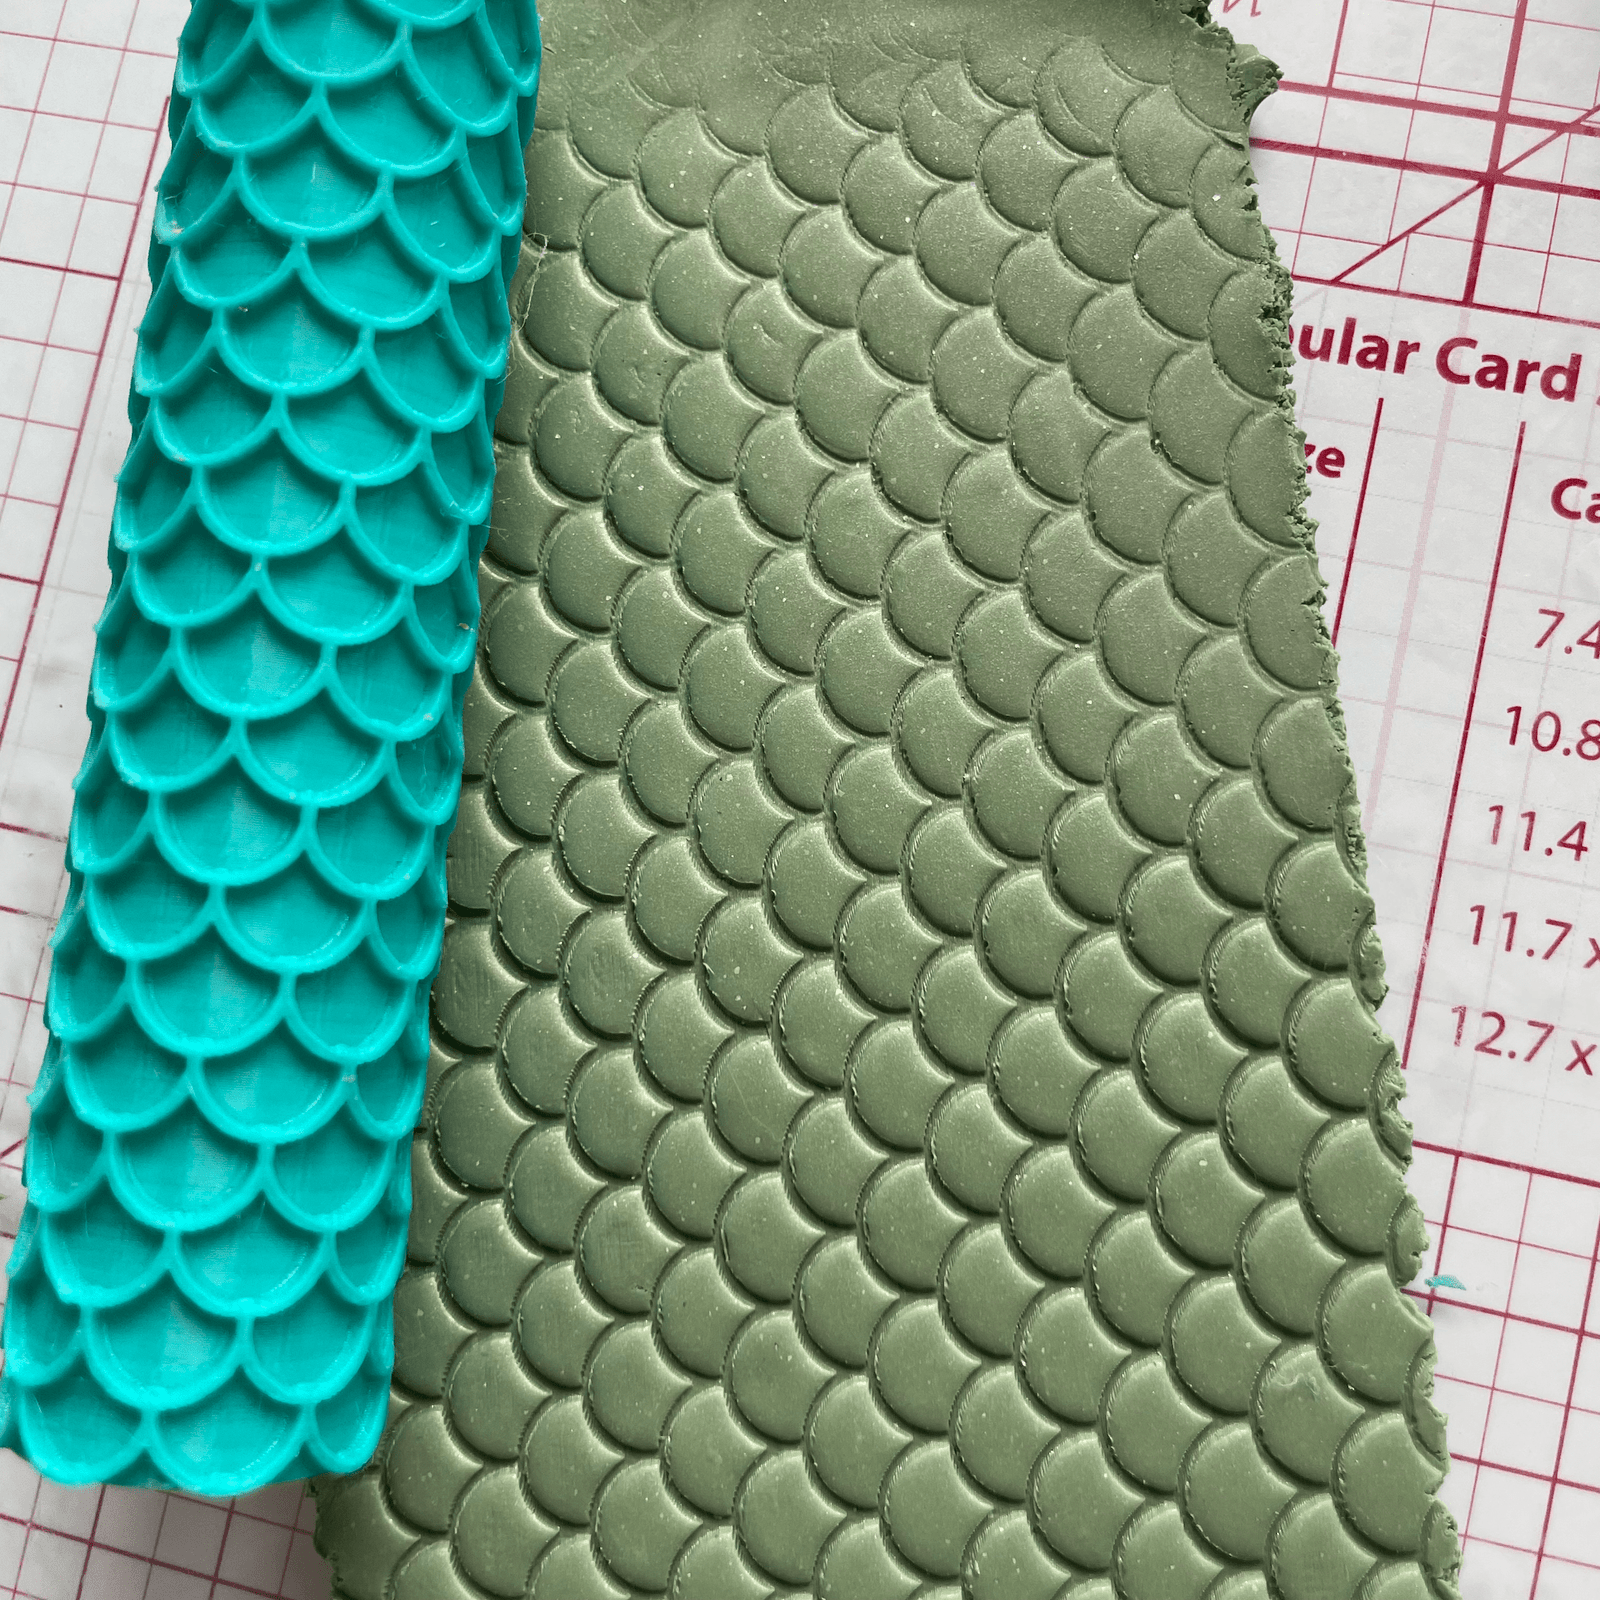 Mermaid Scales Fish Skin Texture Roller For Polymer Clay